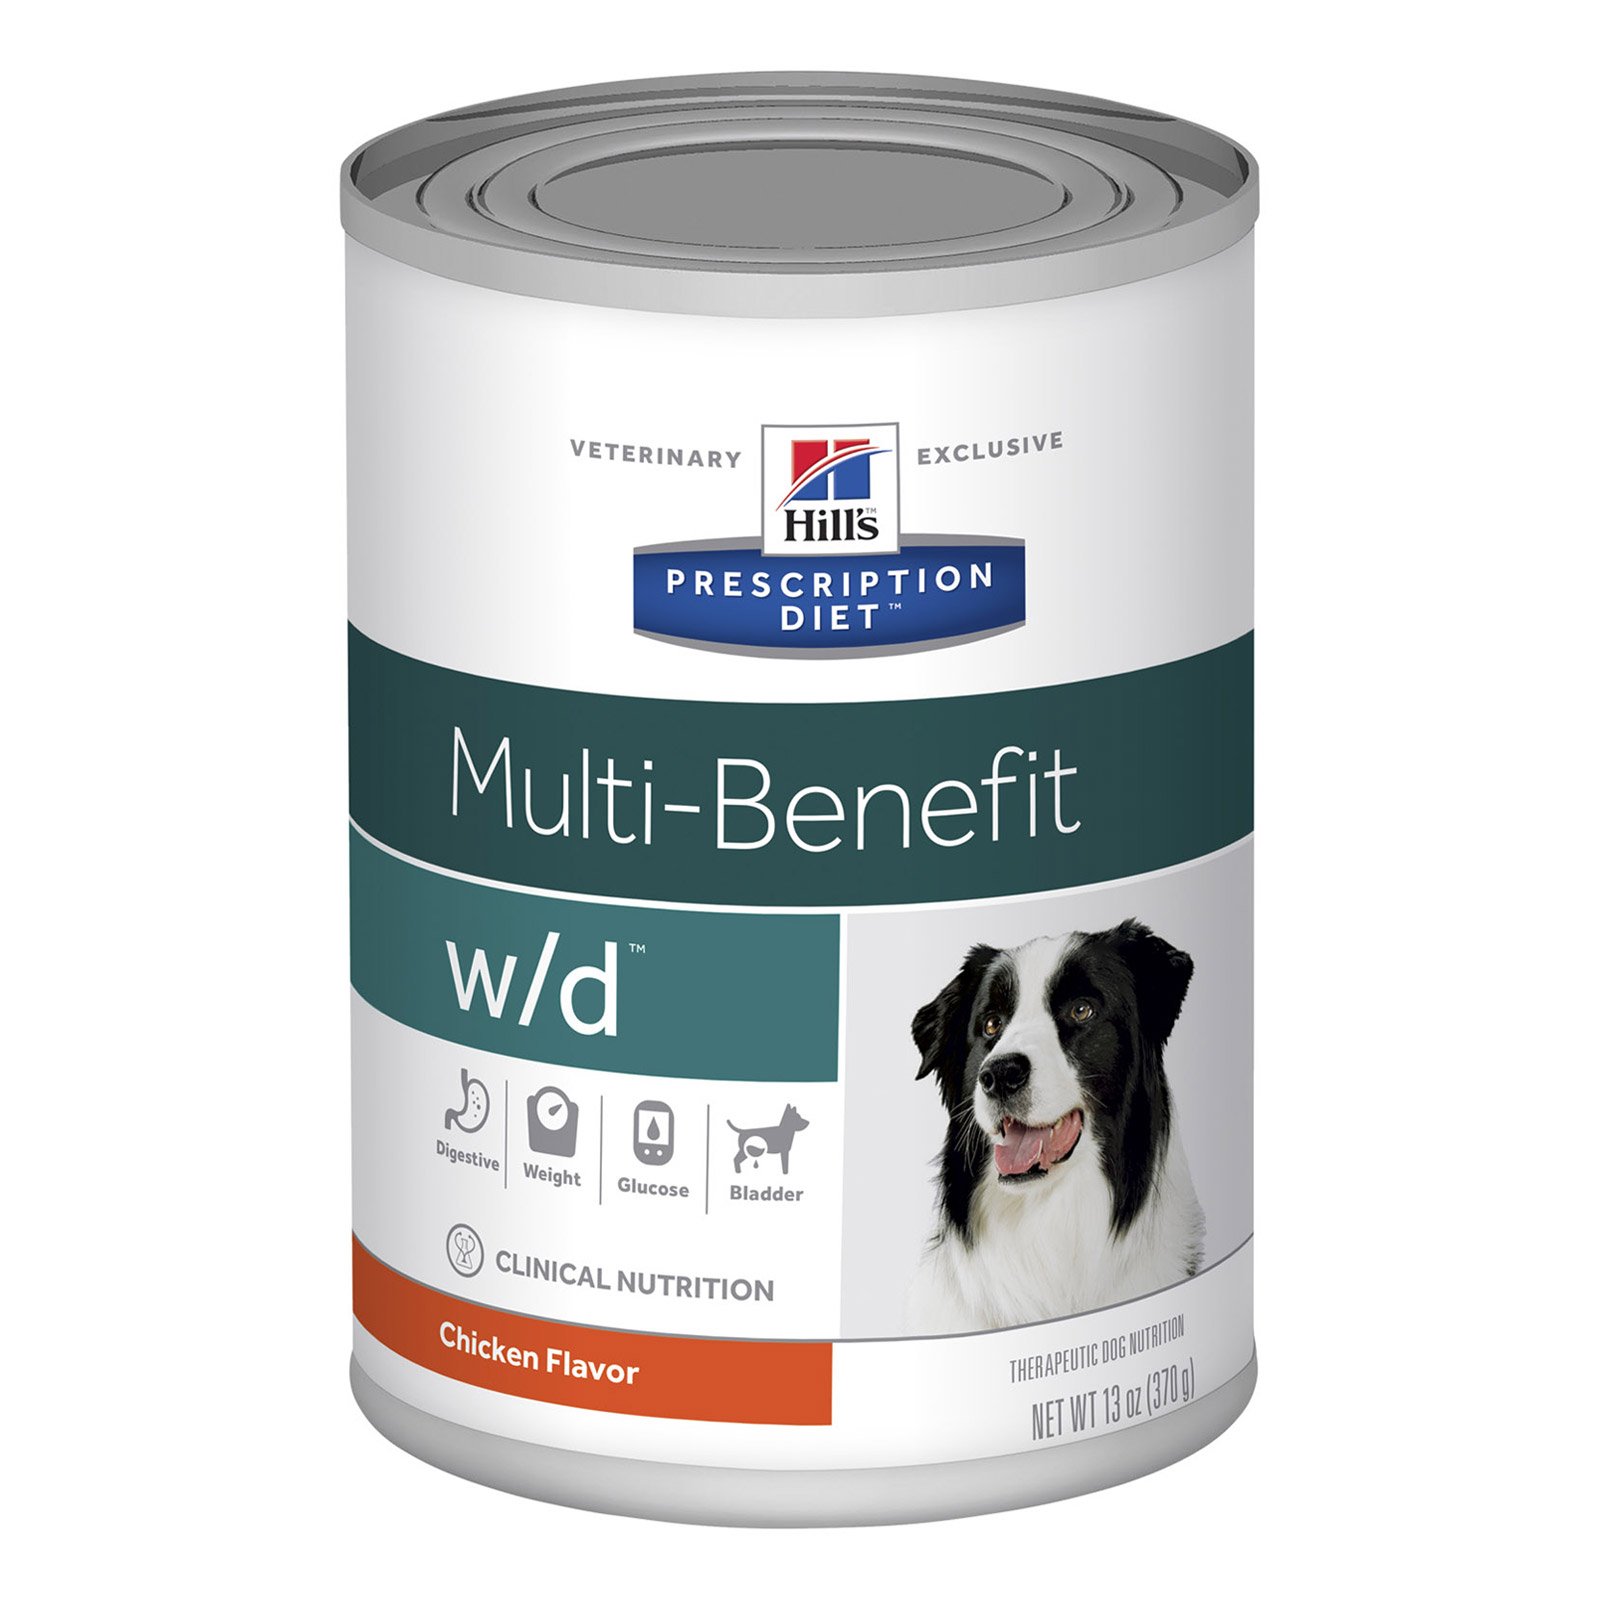 Hill's Prescription Diet w/d Digestive/Weight/Glucose Management Canned Dog Food 370 Gm